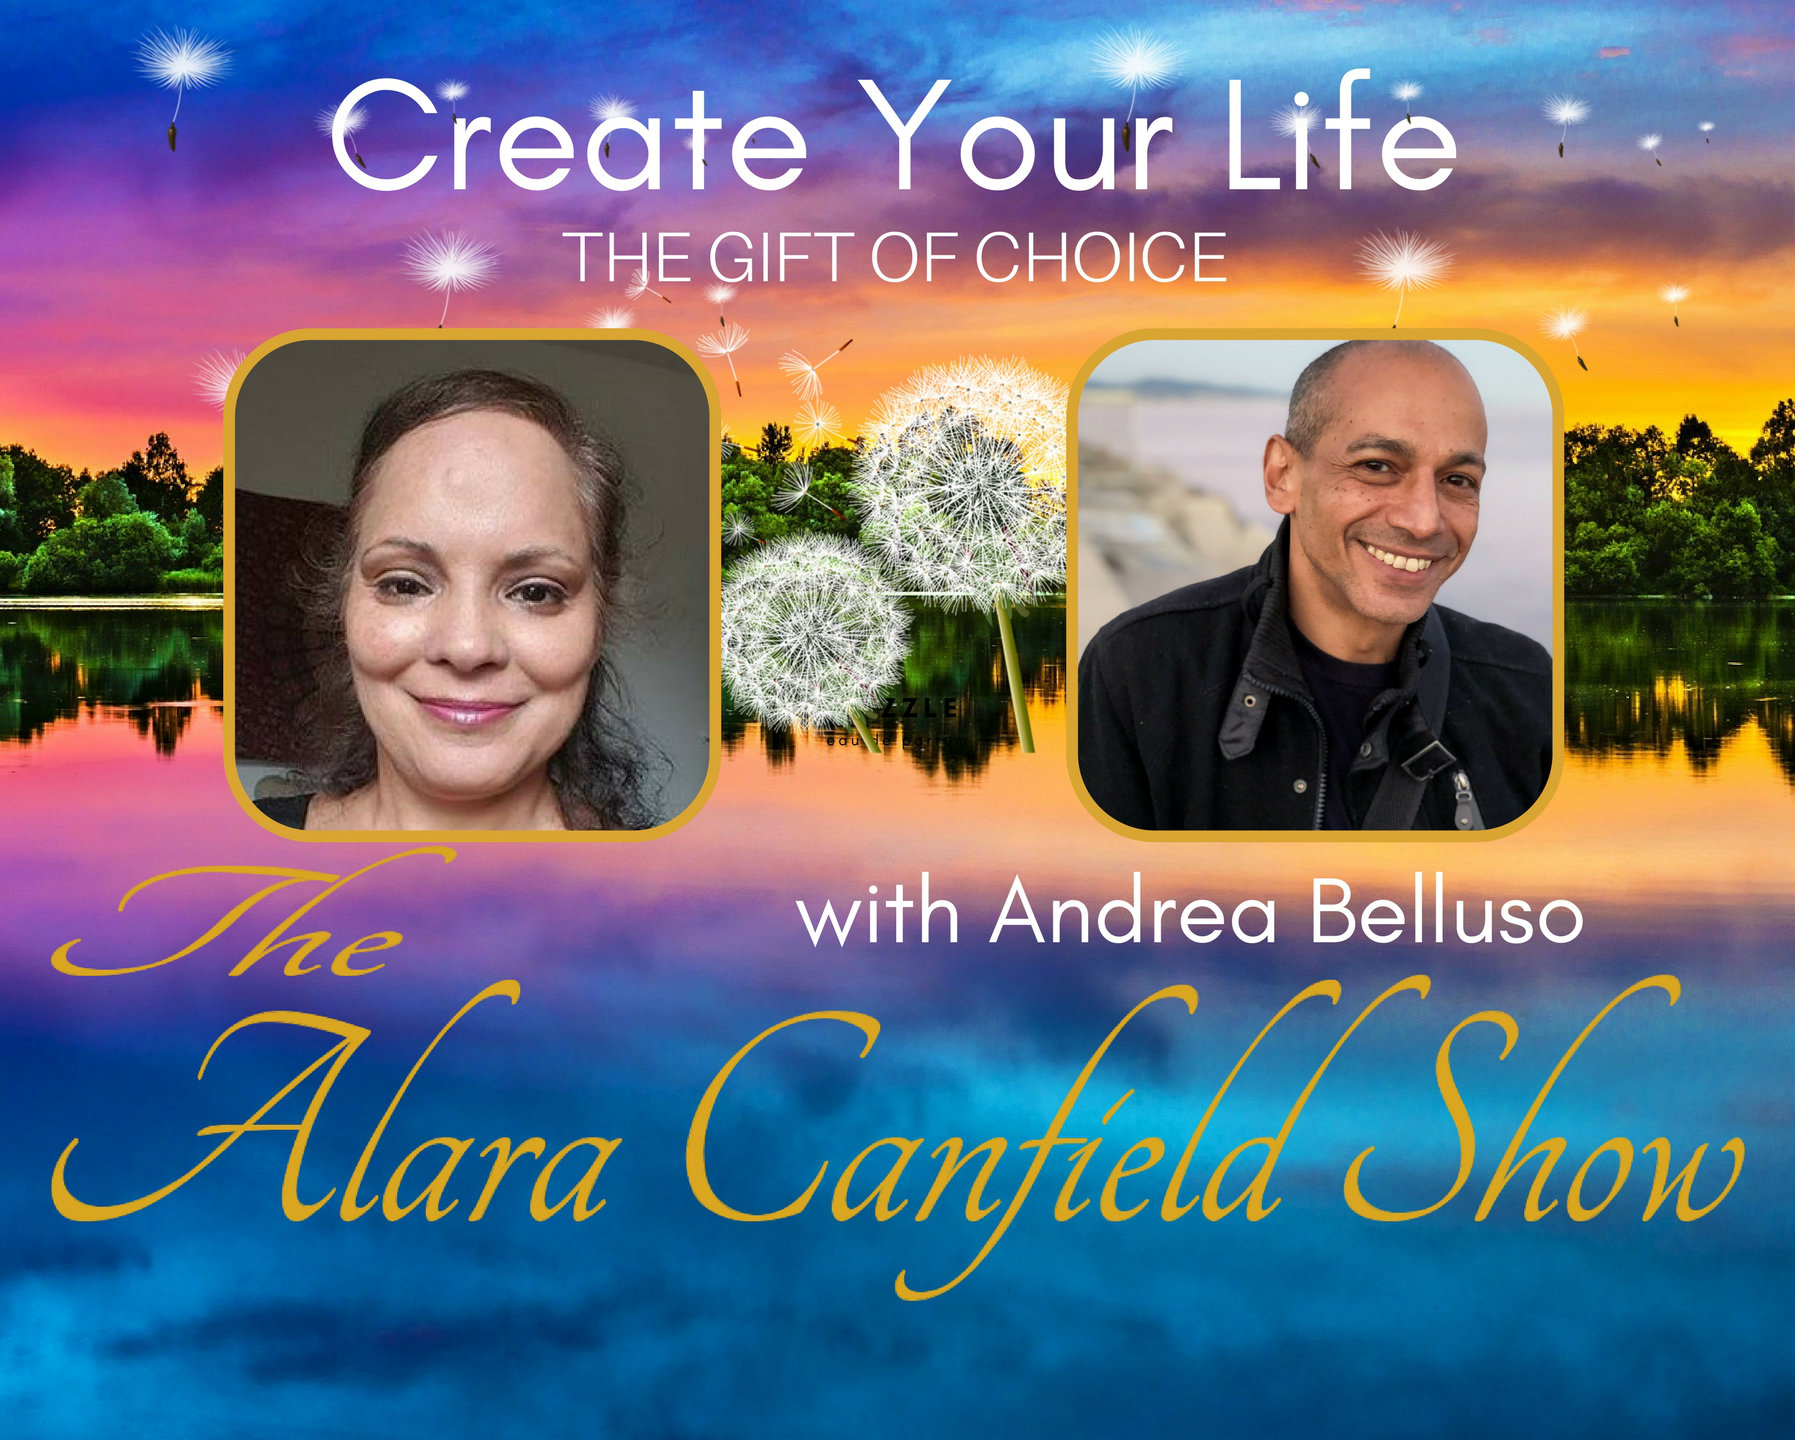 Create Your Life with Andrea Belluso